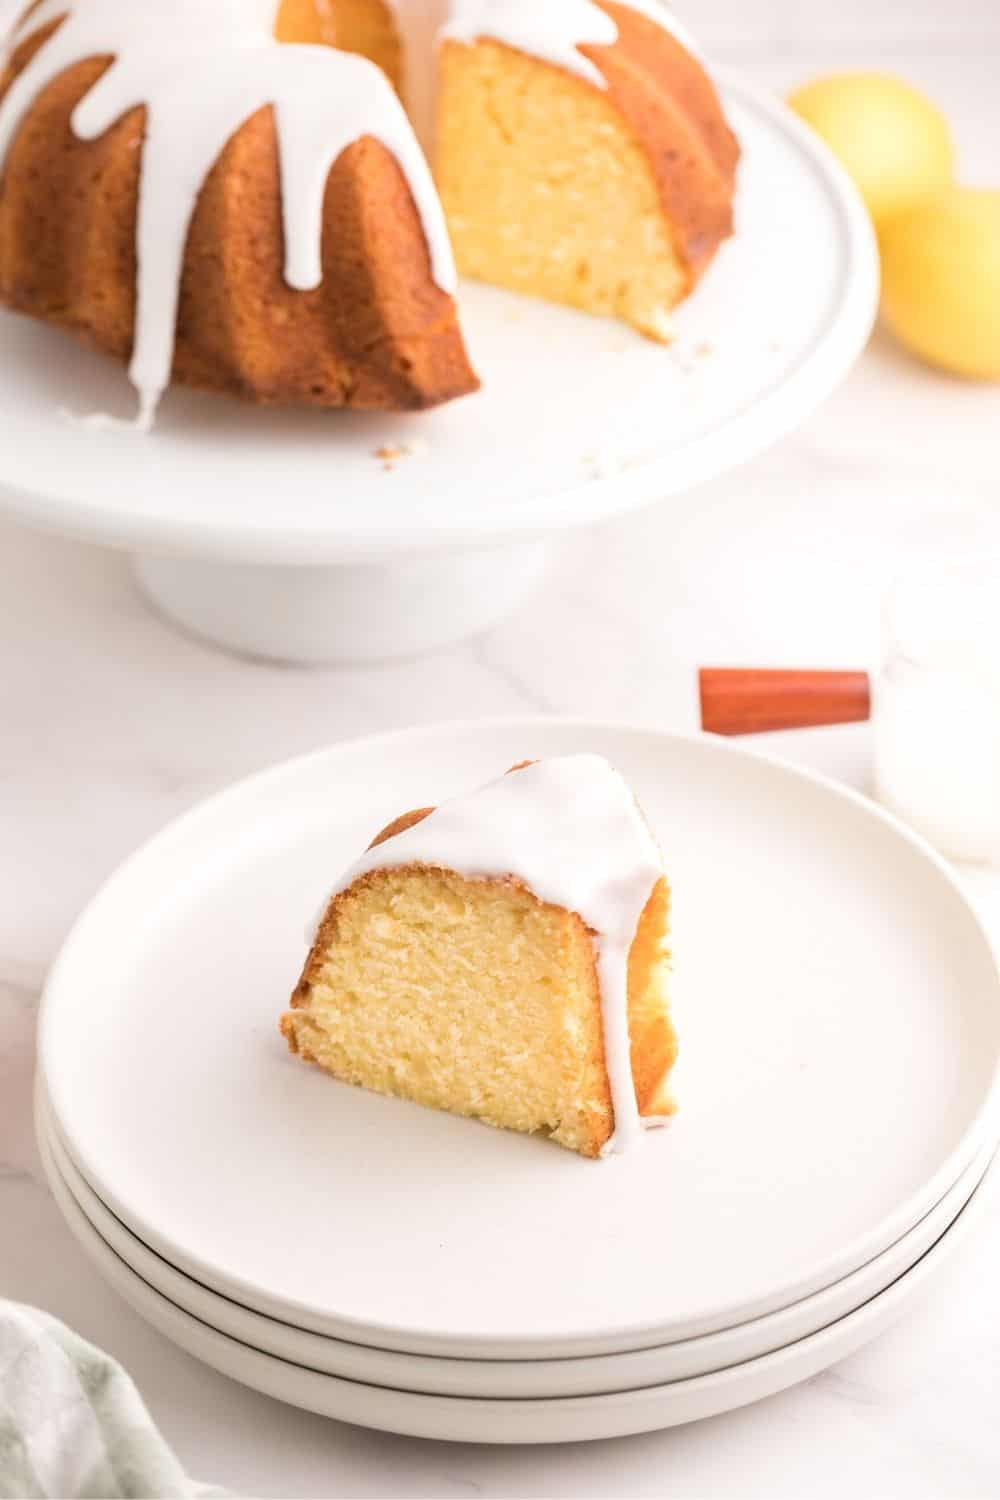 a slice of glazed lemon sponge cake served on a white plate, with the remaining sponge cake in the background.